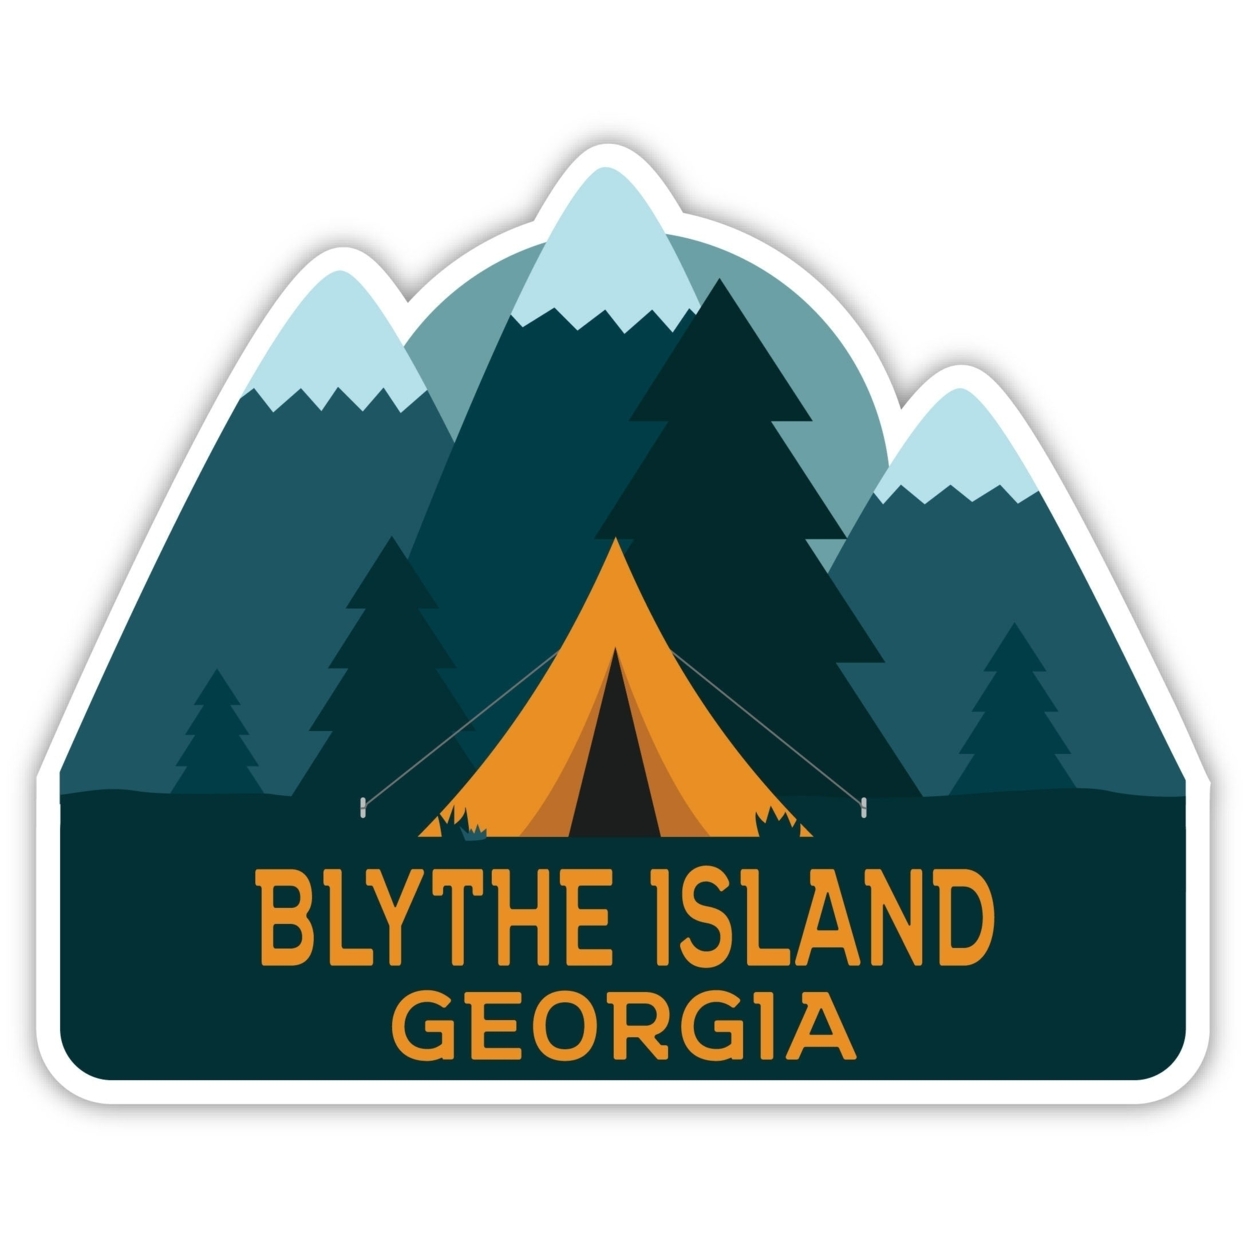 Blythe Island Georgia Souvenir Decorative Stickers (Choose Theme And Size) - 4-Pack, 4-Inch, Great Outdoors